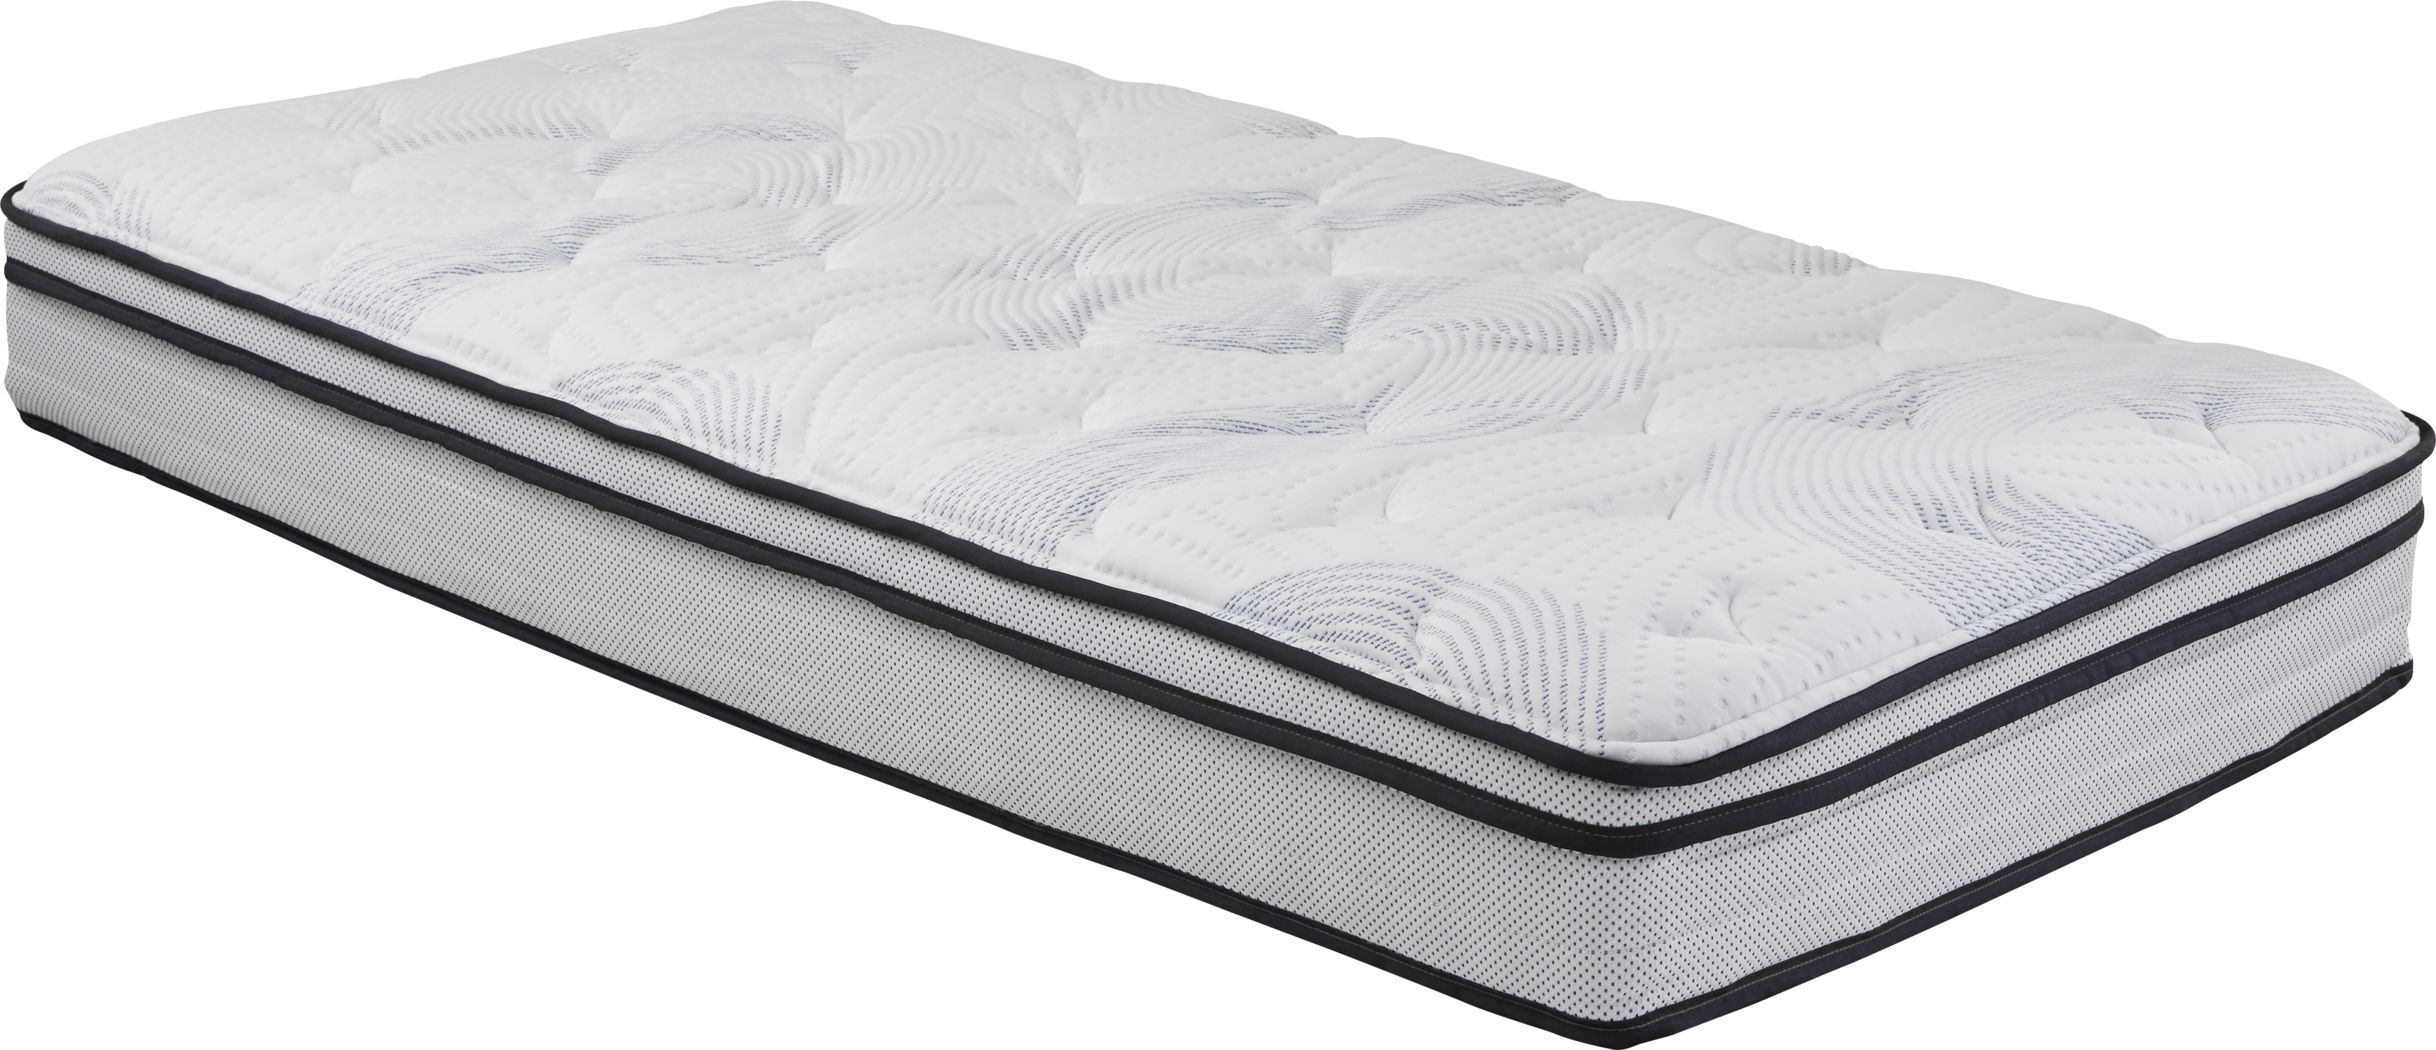 magbags twin size mattress cover